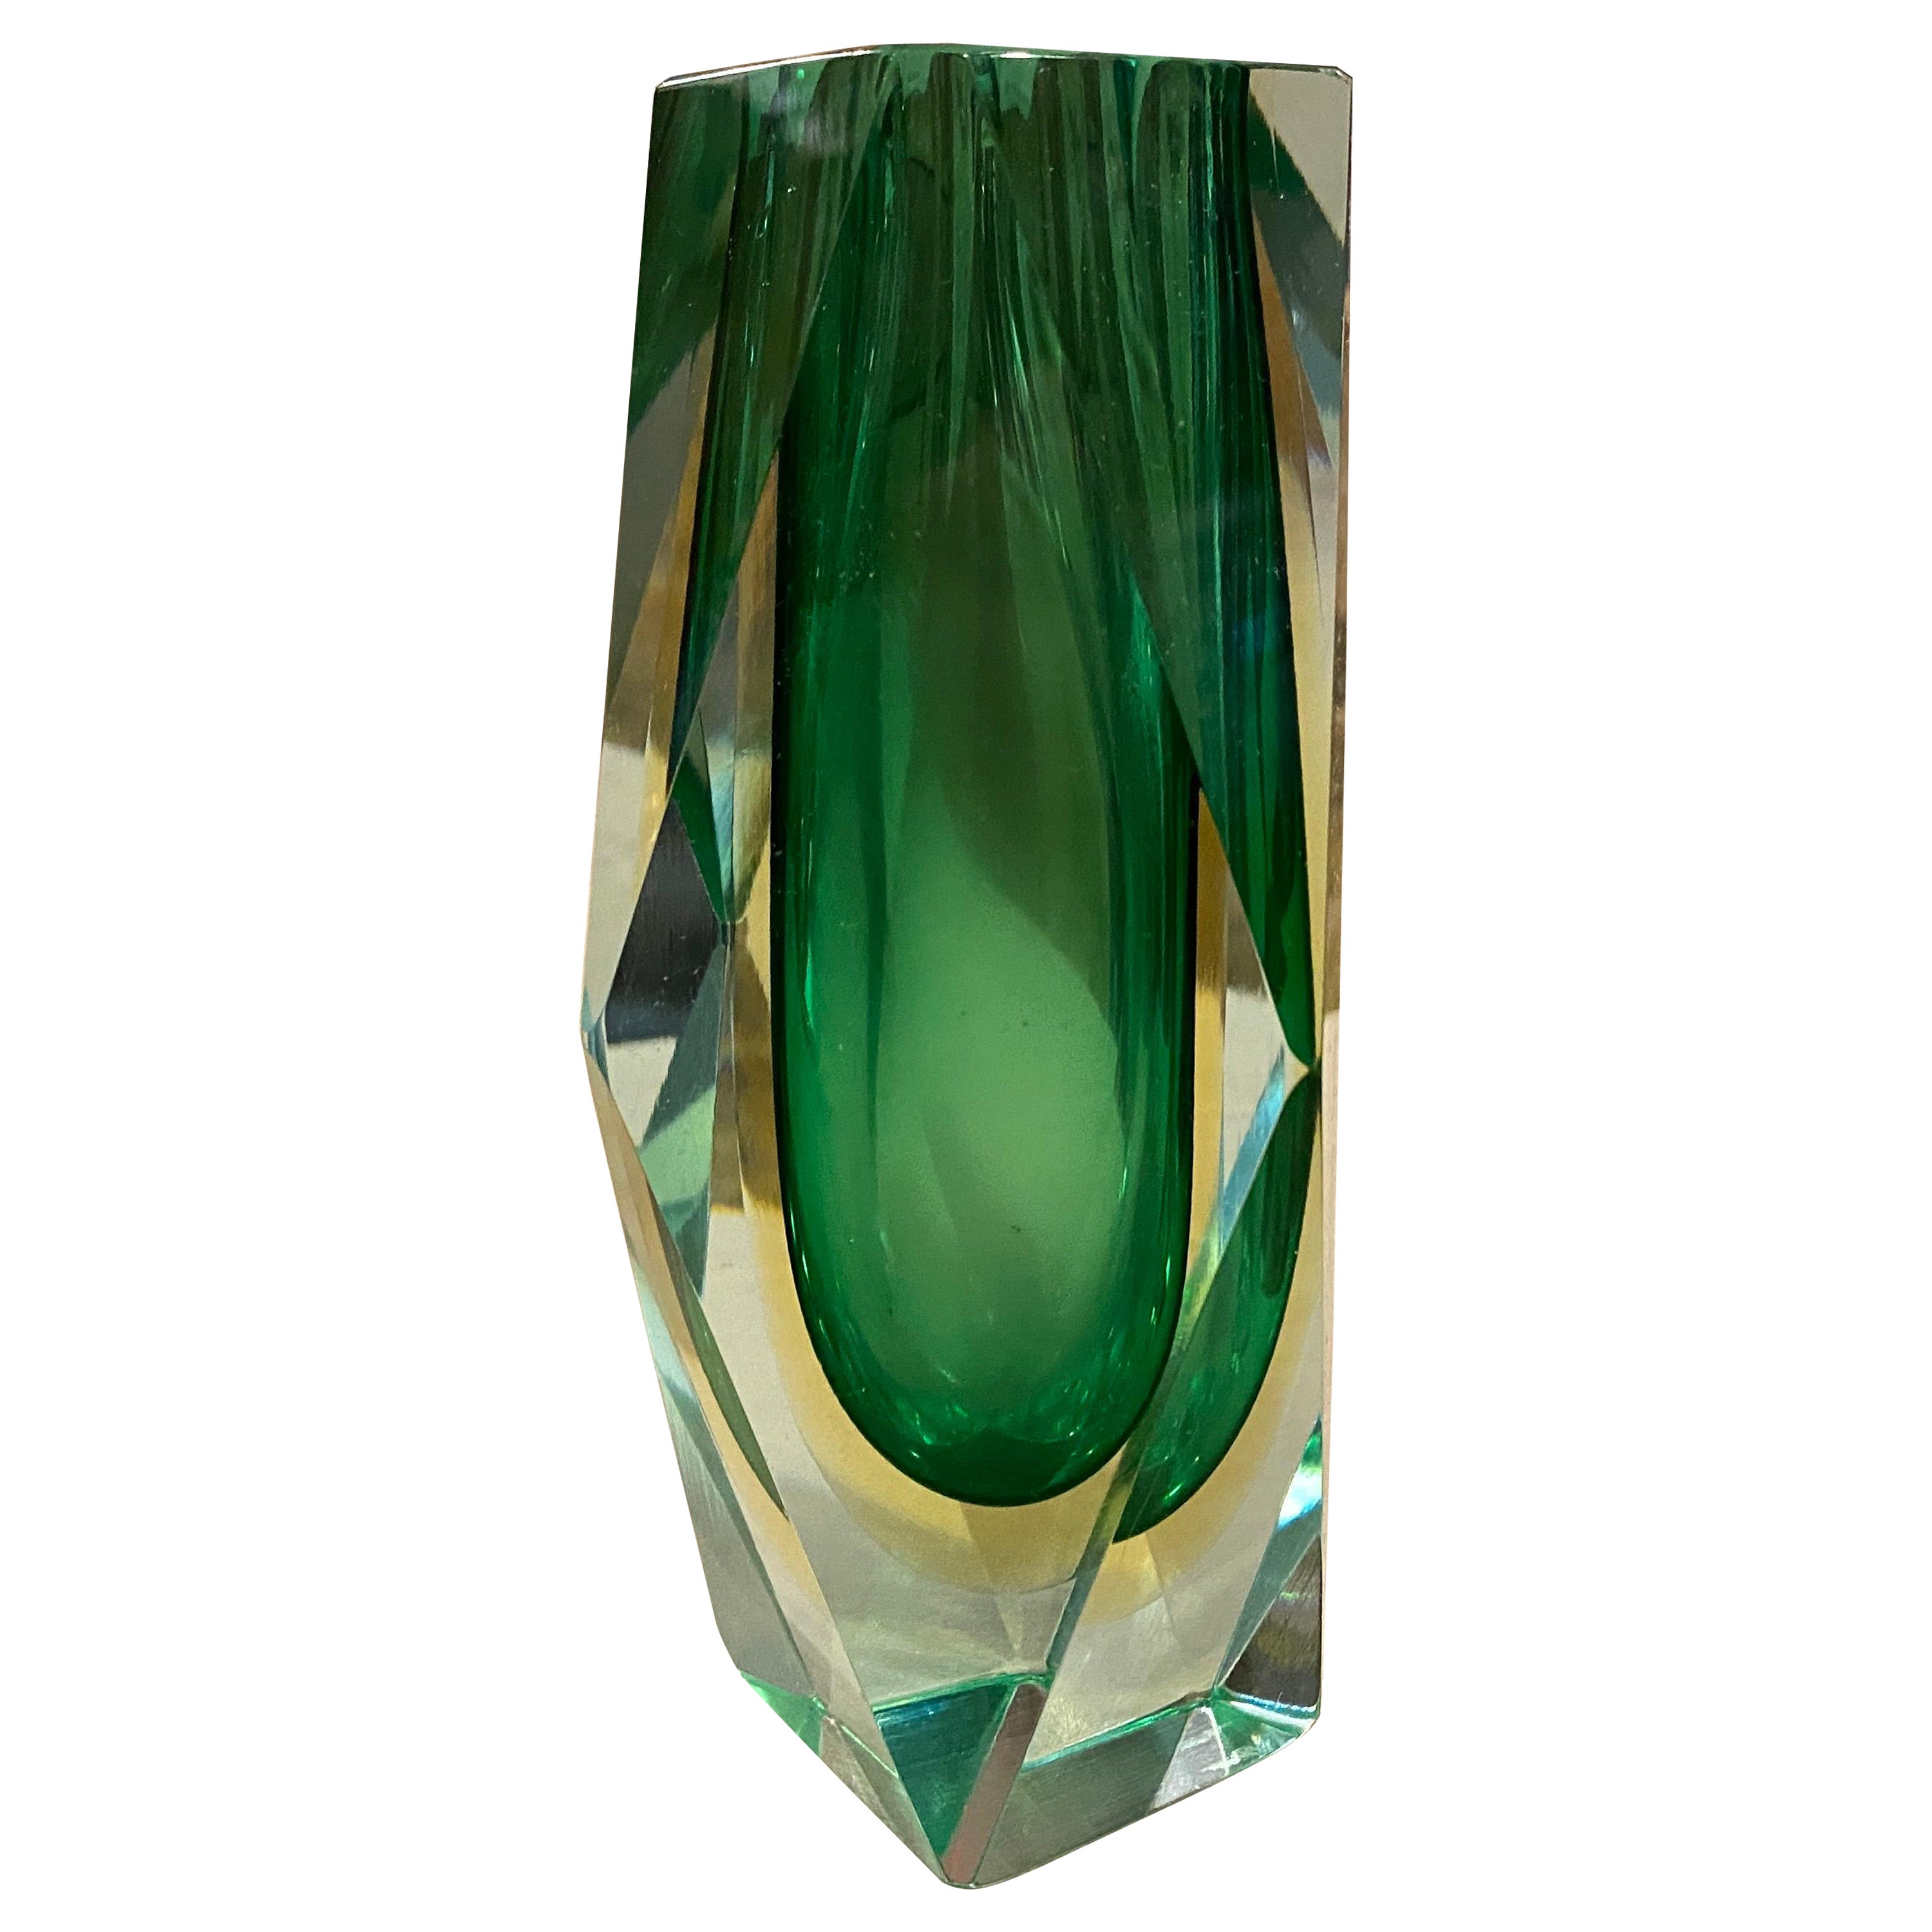 A green and yellow Sommerso Murano glass vase designed and manufactured in Italy in the Seventies, the multifaceted style was very popular in Murano in that period, is a stunning example of Italian craftsmanship and design from that era. The vase